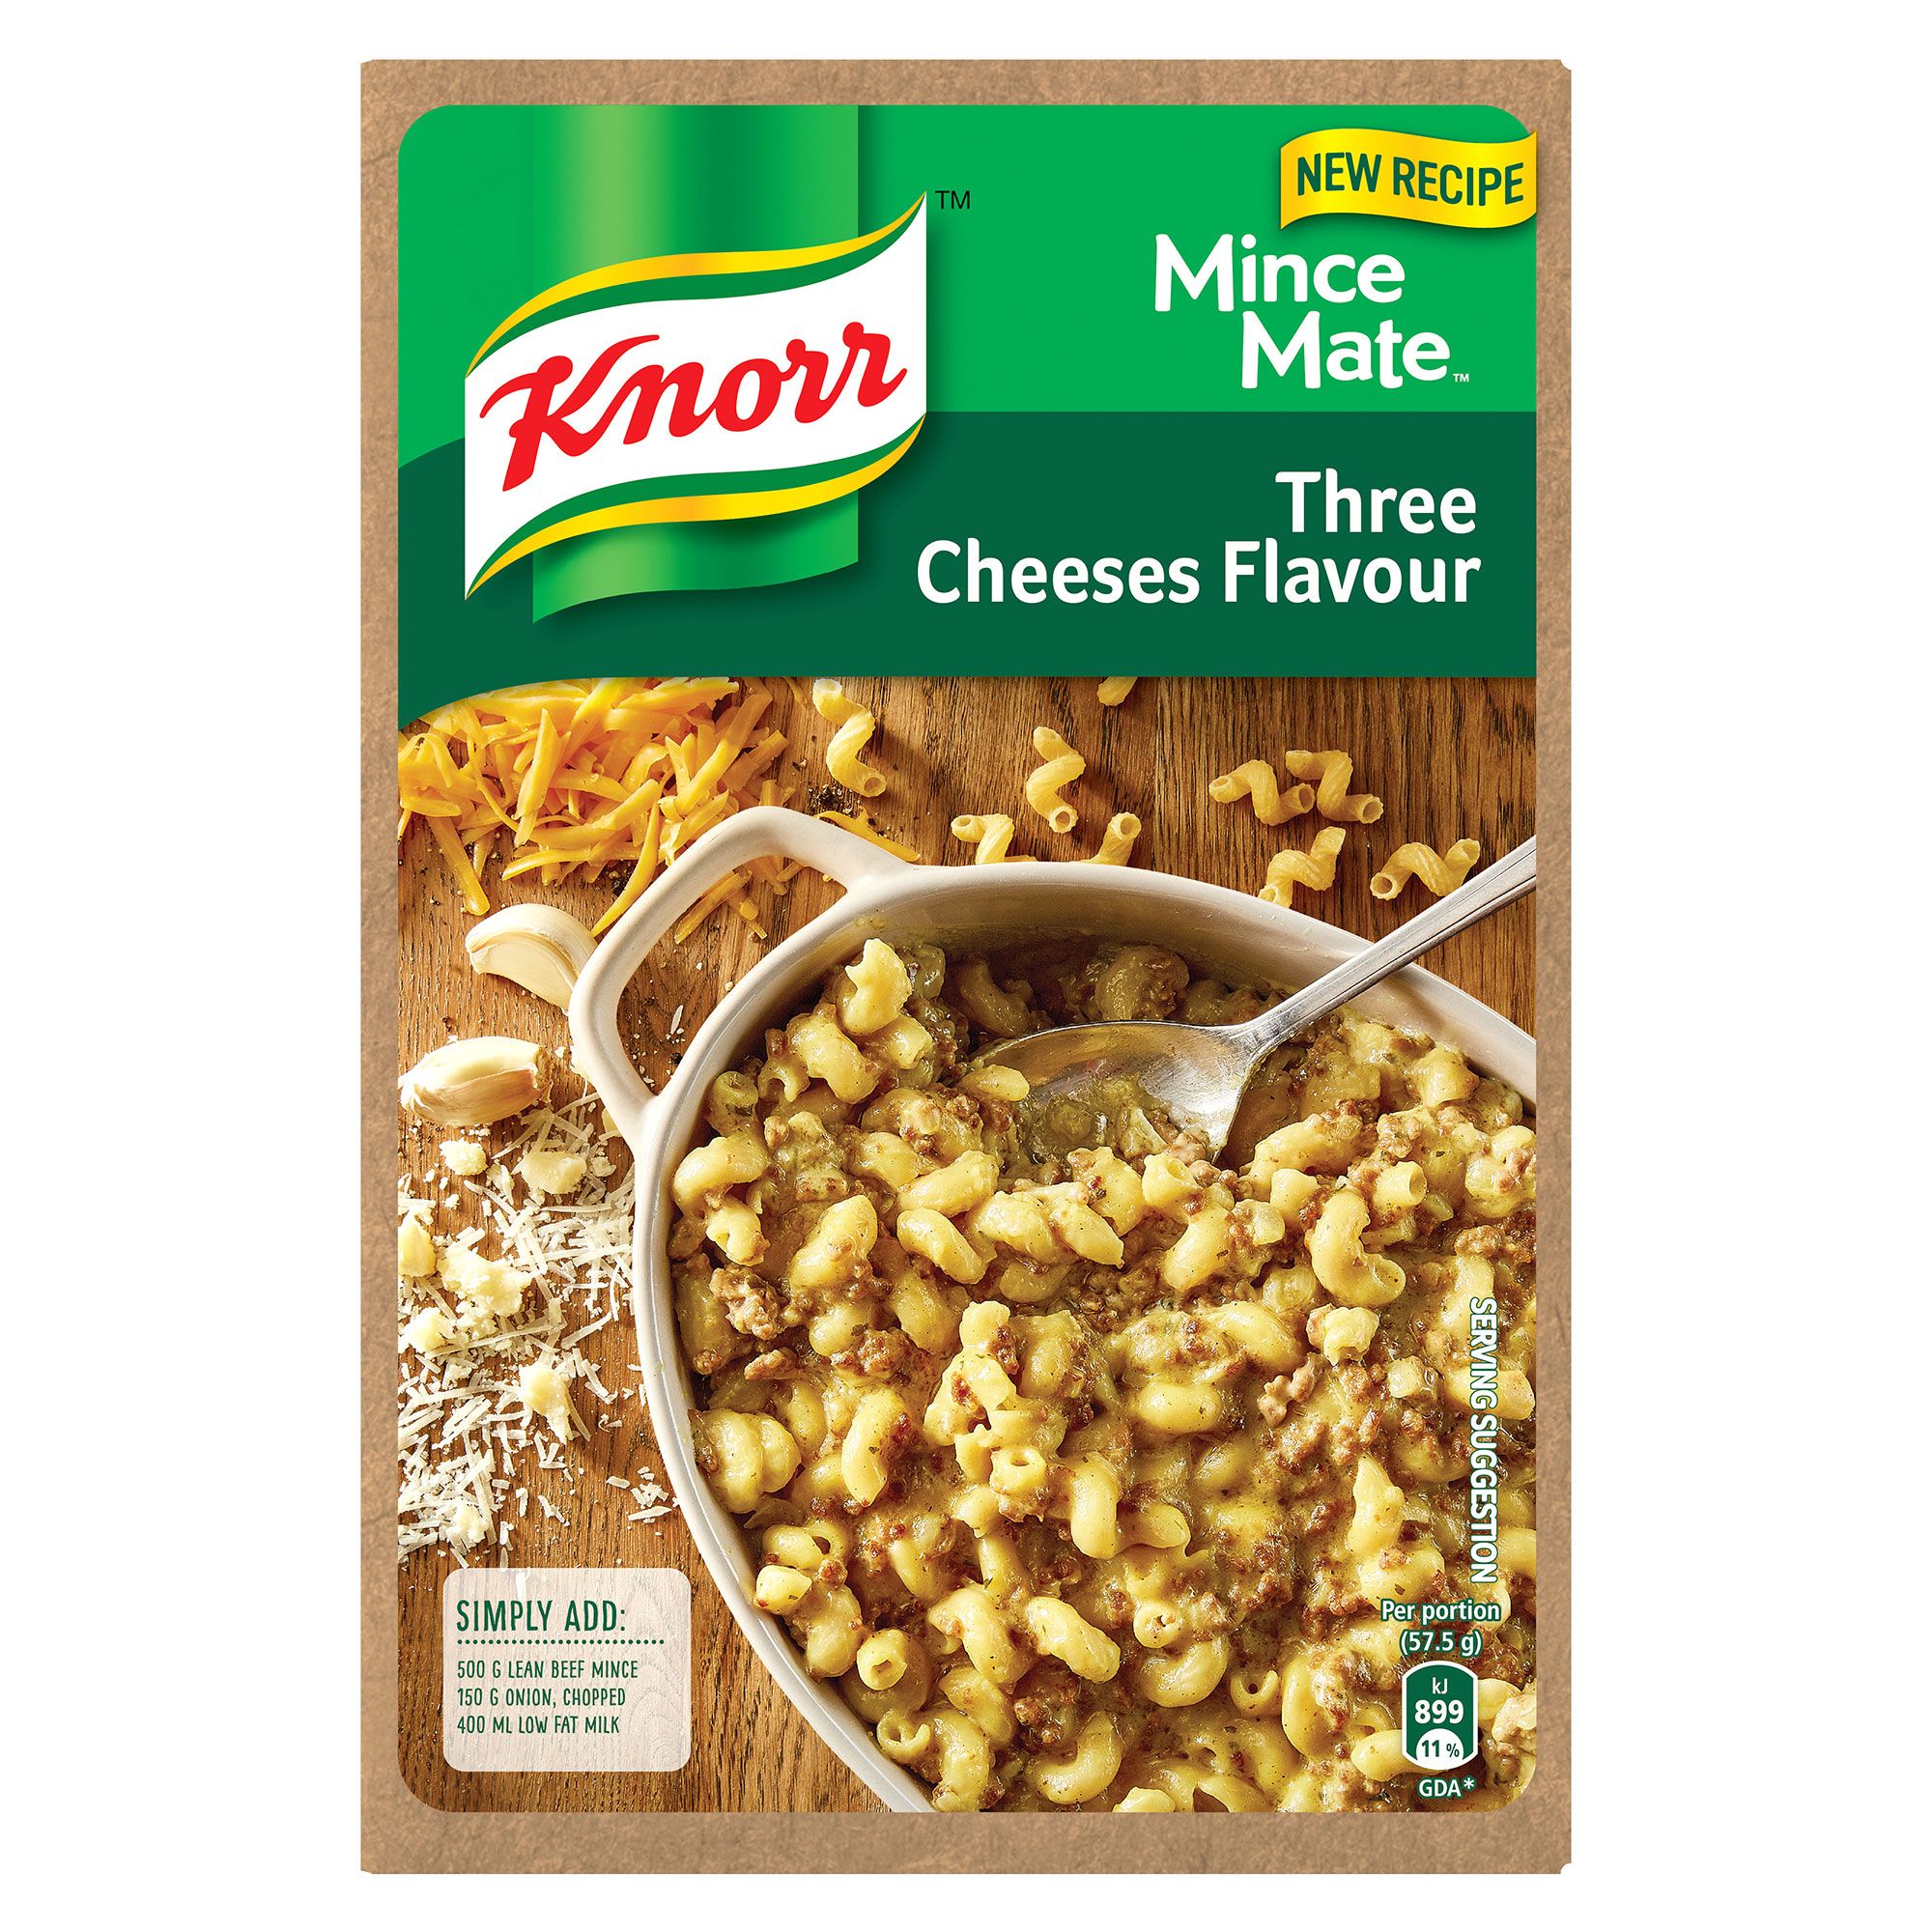 Knorr Three Cheese Mince Mate